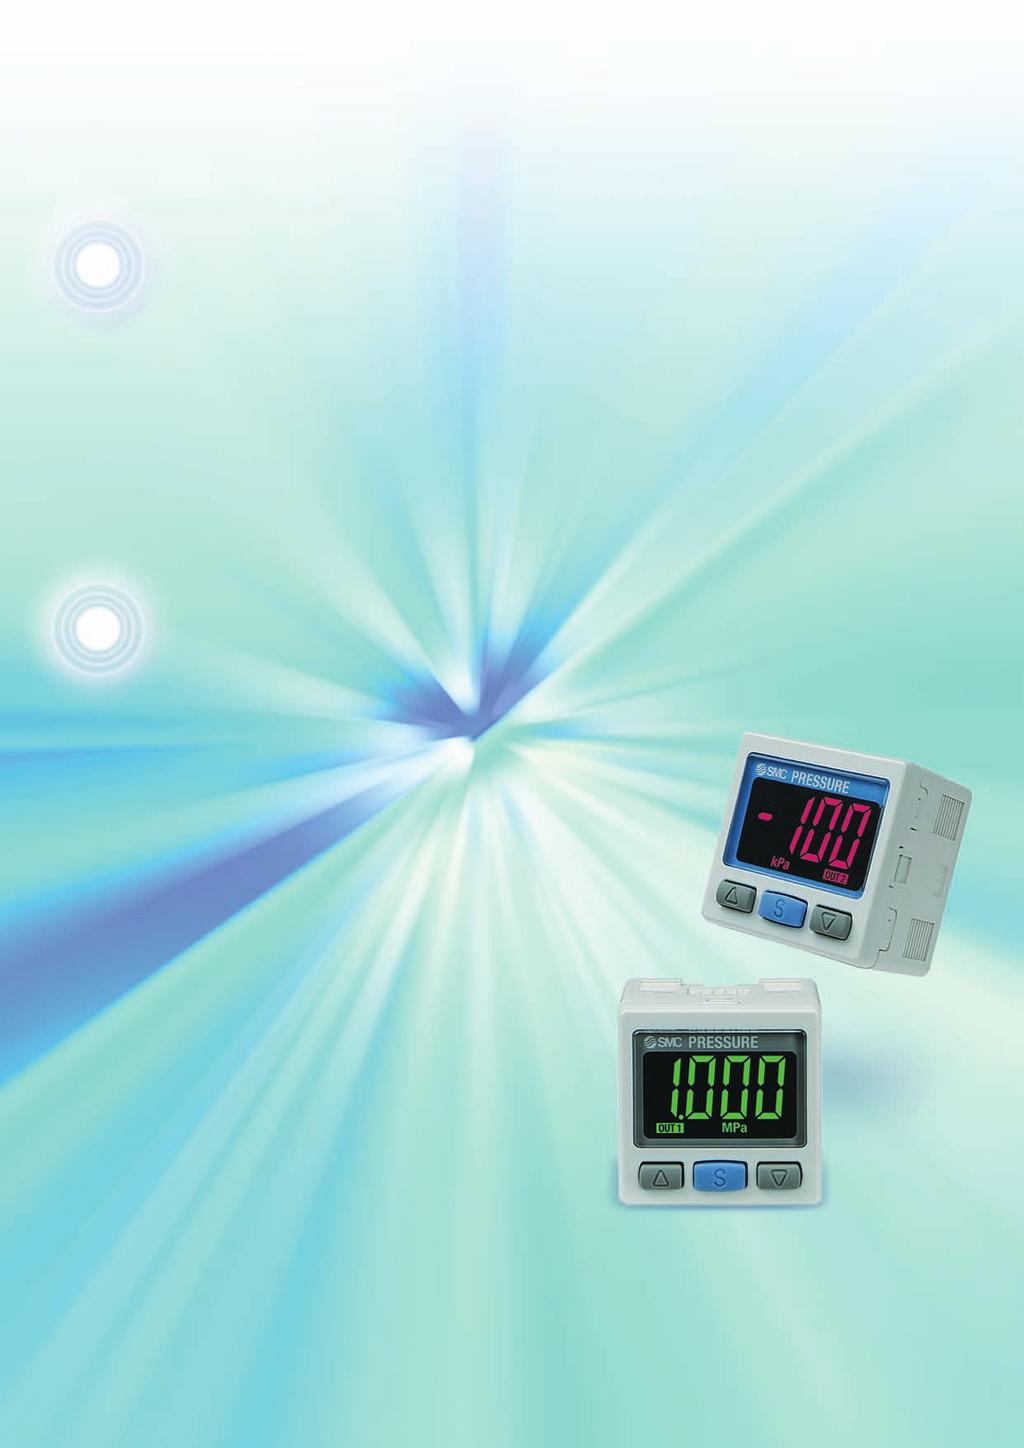 2-Color Display High-Precision Digital Pressure Switch Settings can be copied to up to 1 slave sensors at once. The settings of the master sensor can be copied to the slave sensors.